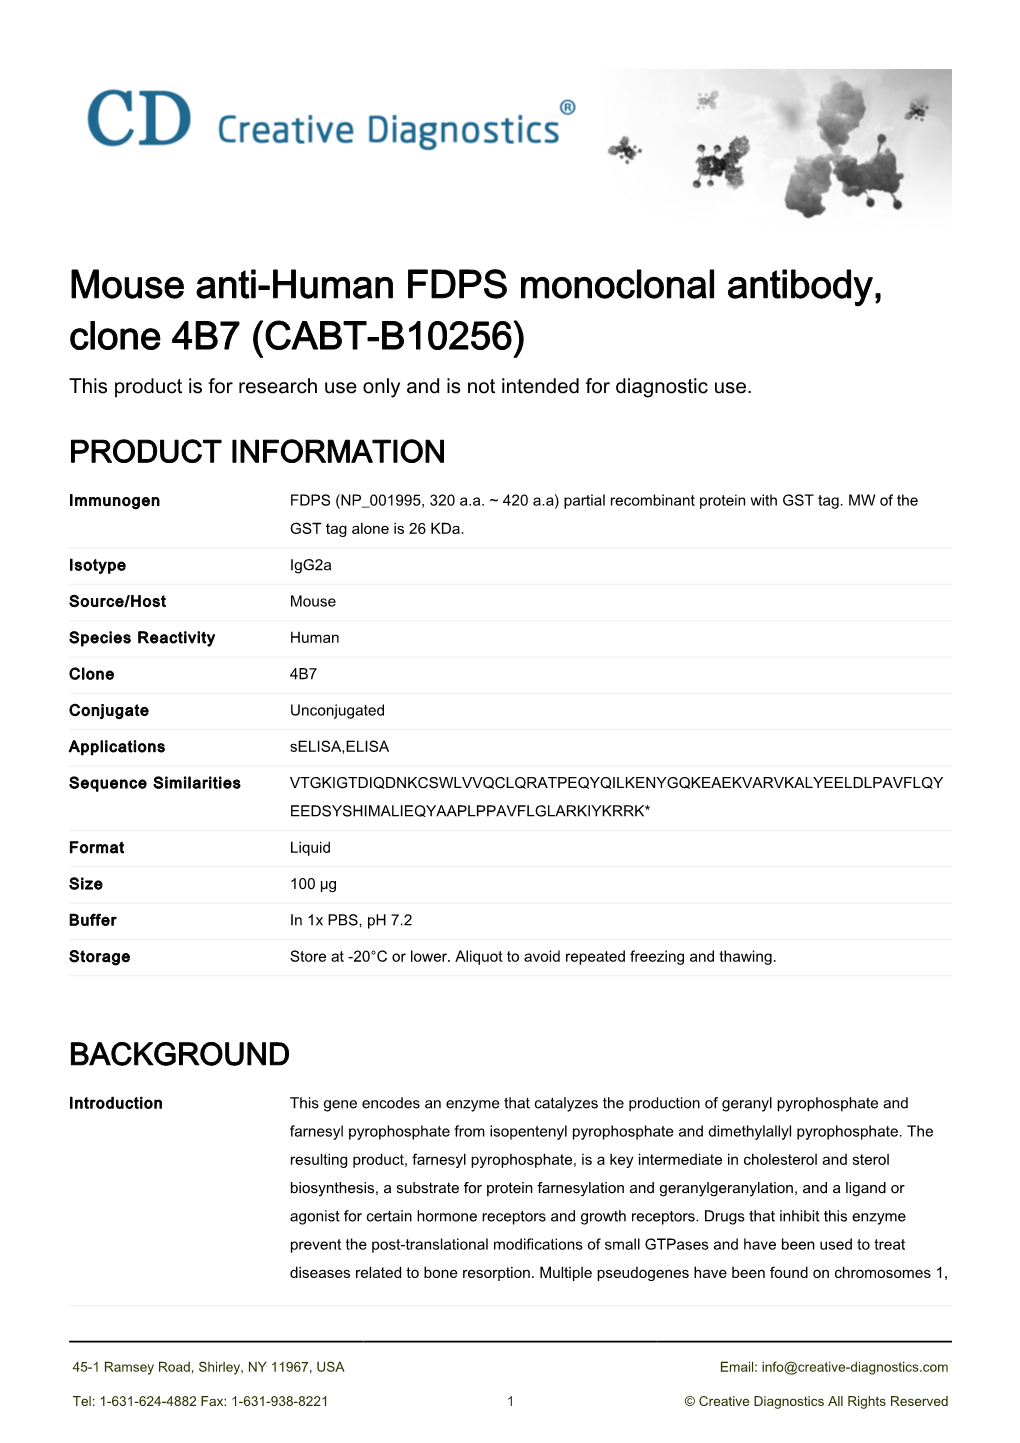 Mouse Anti-Human FDPS Monoclonal Antibody, Clone 4B7 (CABT-B10256) This Product Is for Research Use Only and Is Not Intended for Diagnostic Use